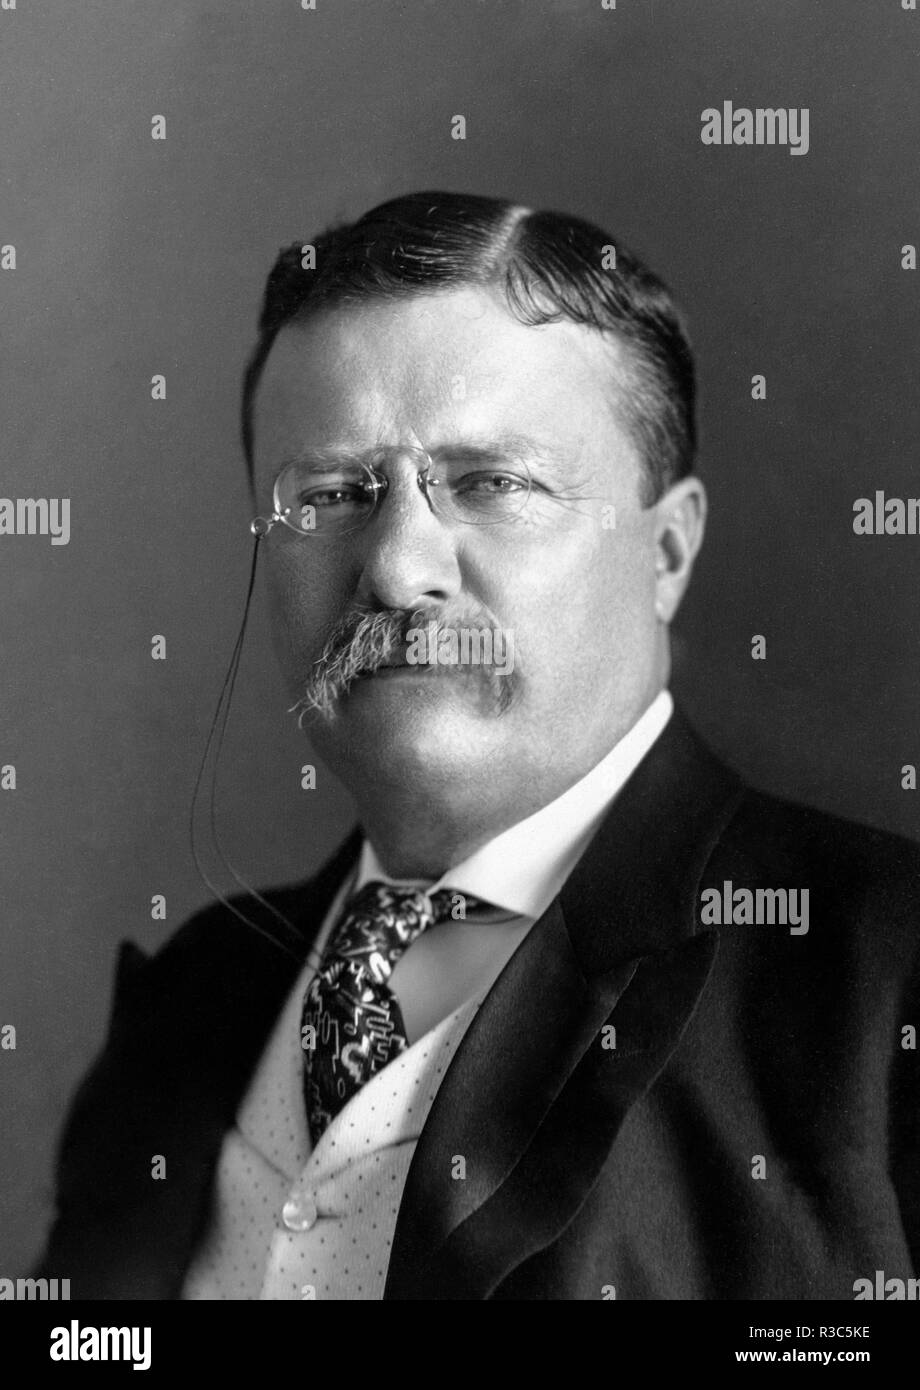 THEODORE ROOSEVELT (1858-1919) as 26th President of the United States Stock Photo